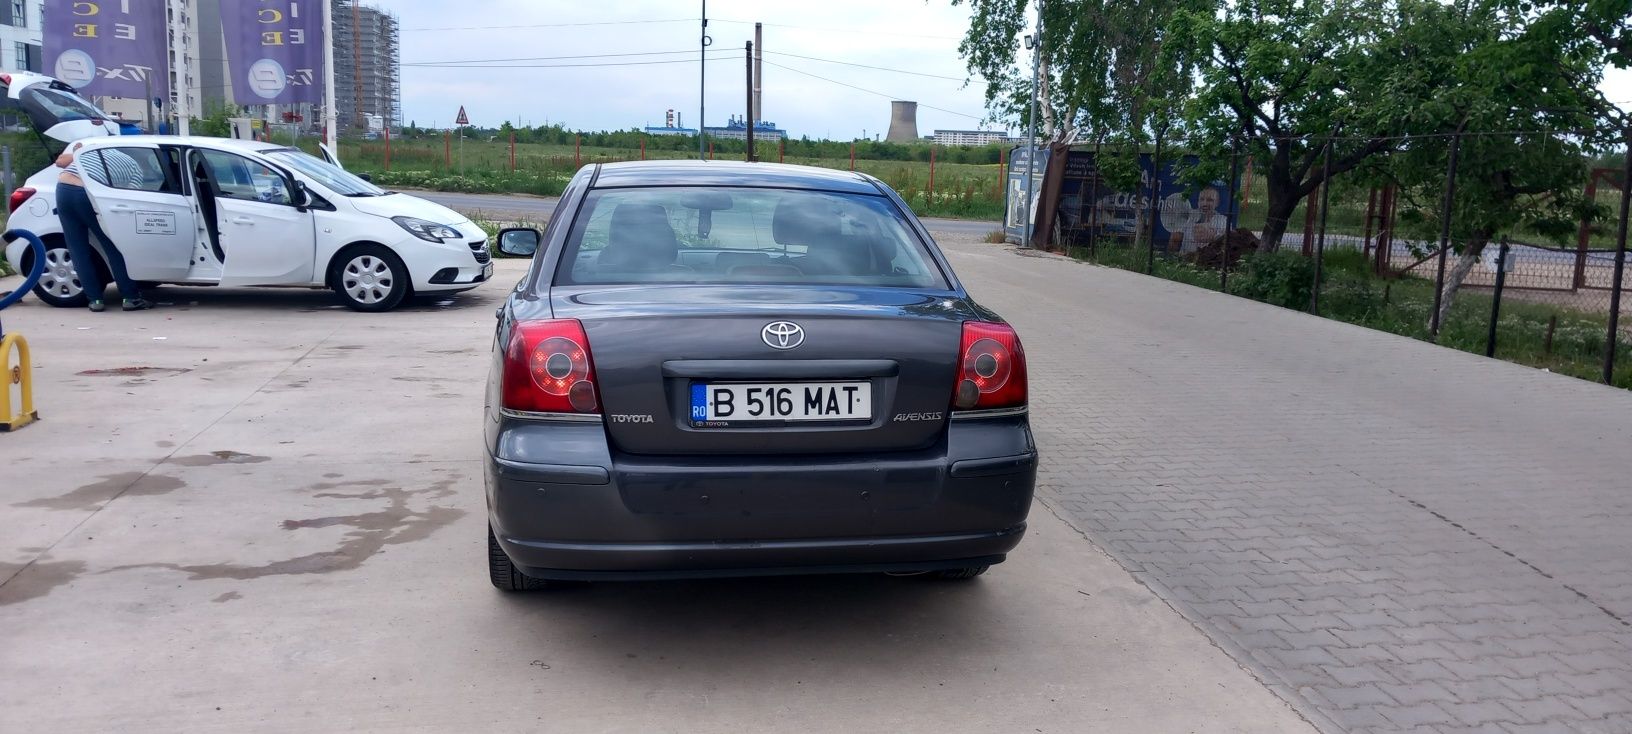 Toyota avensis an 2007